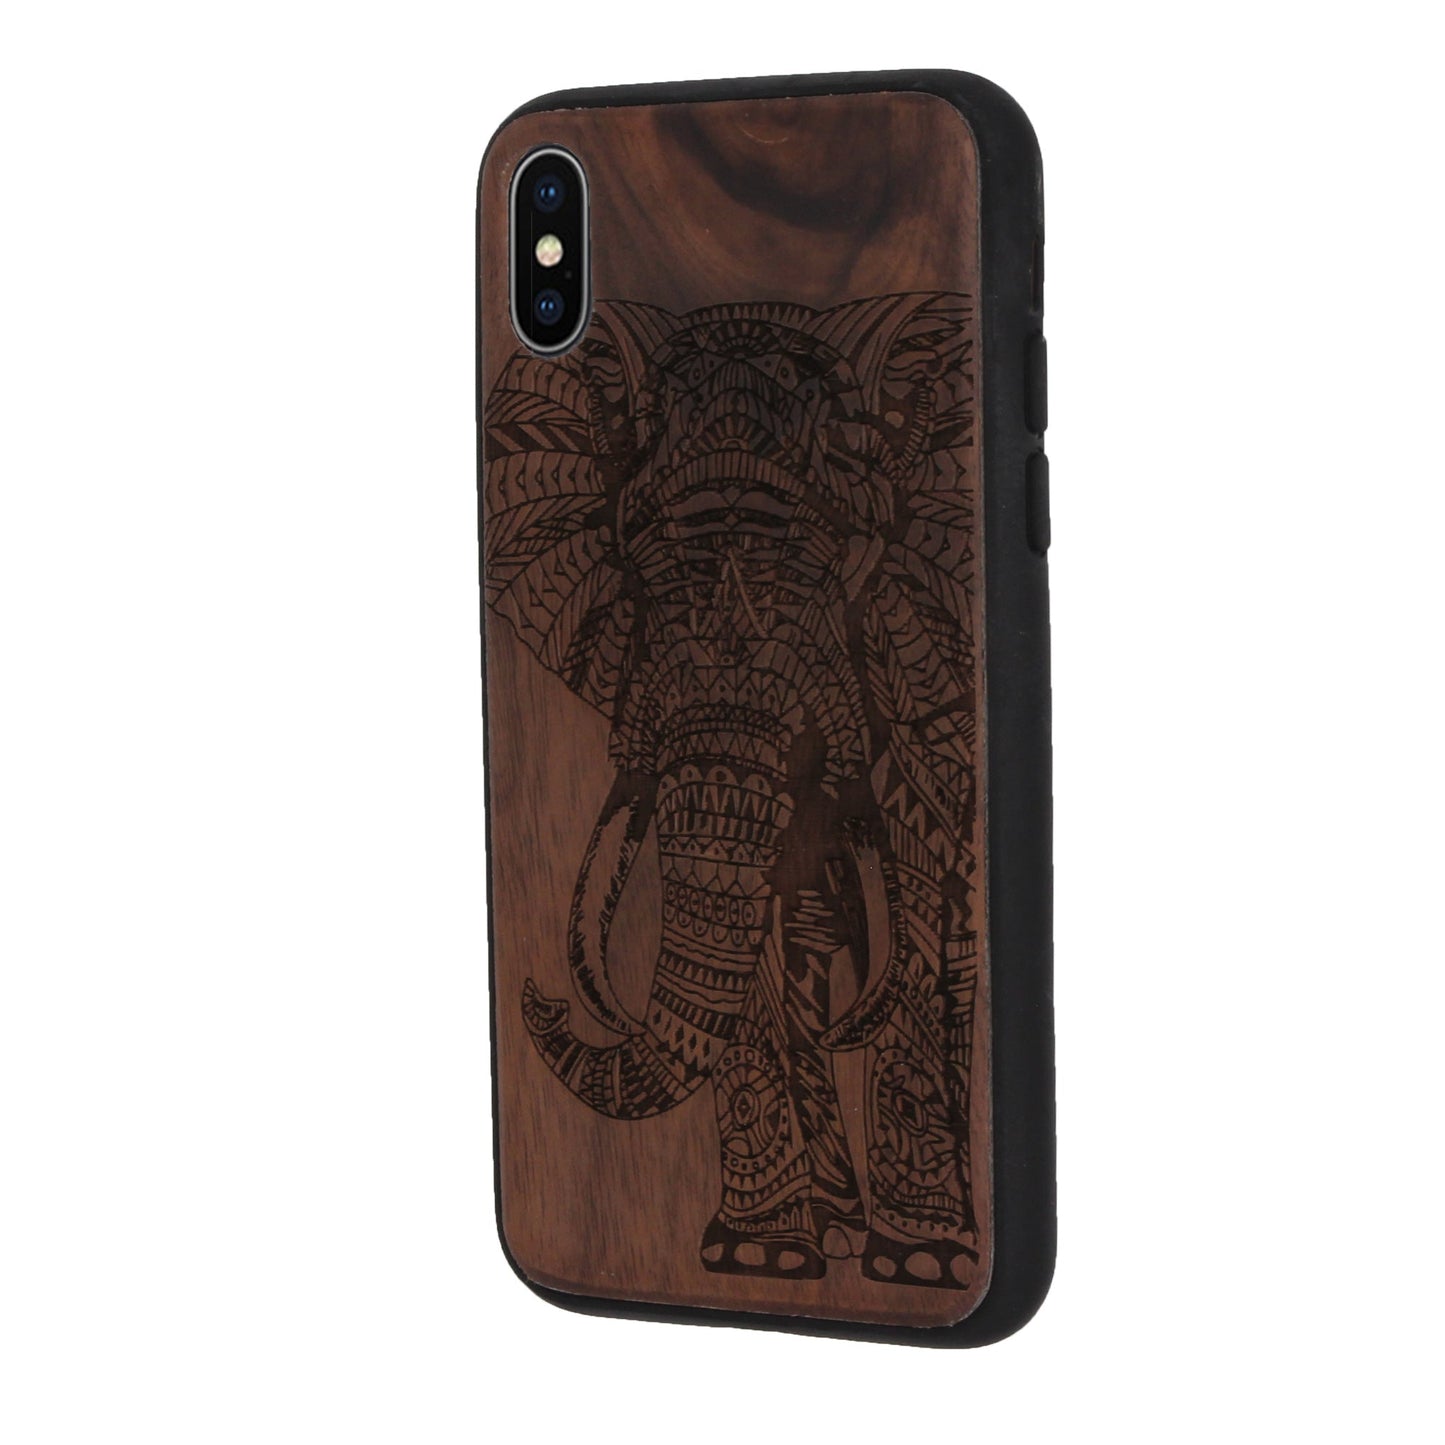 Elephant Eden case made of walnut wood for iPhone X/XS